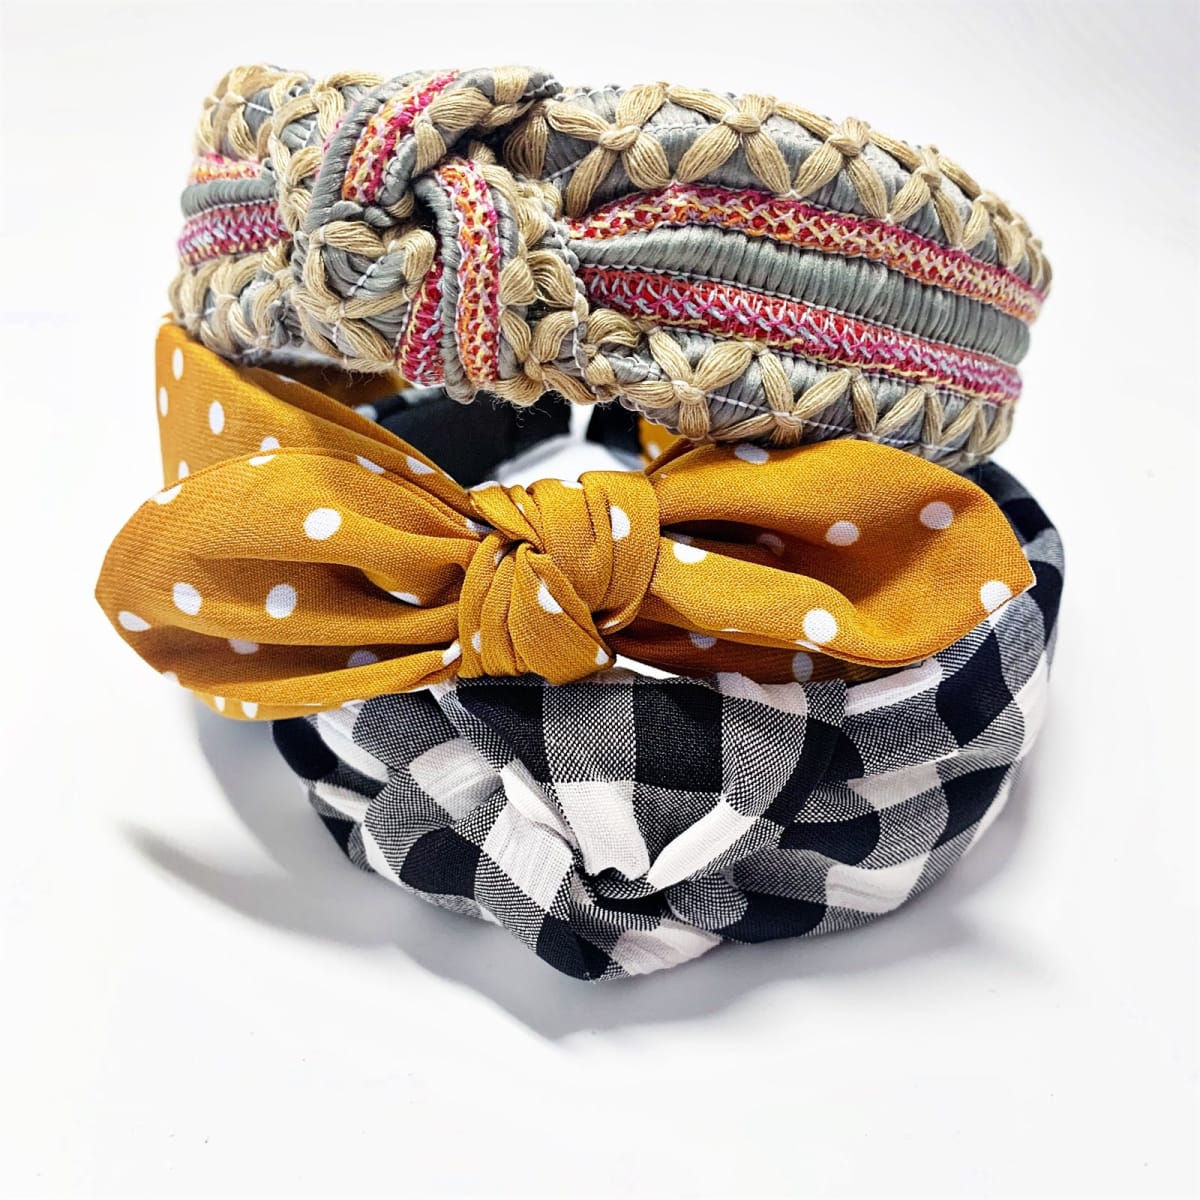 Patterned Adult Headbands – Only $3.99!